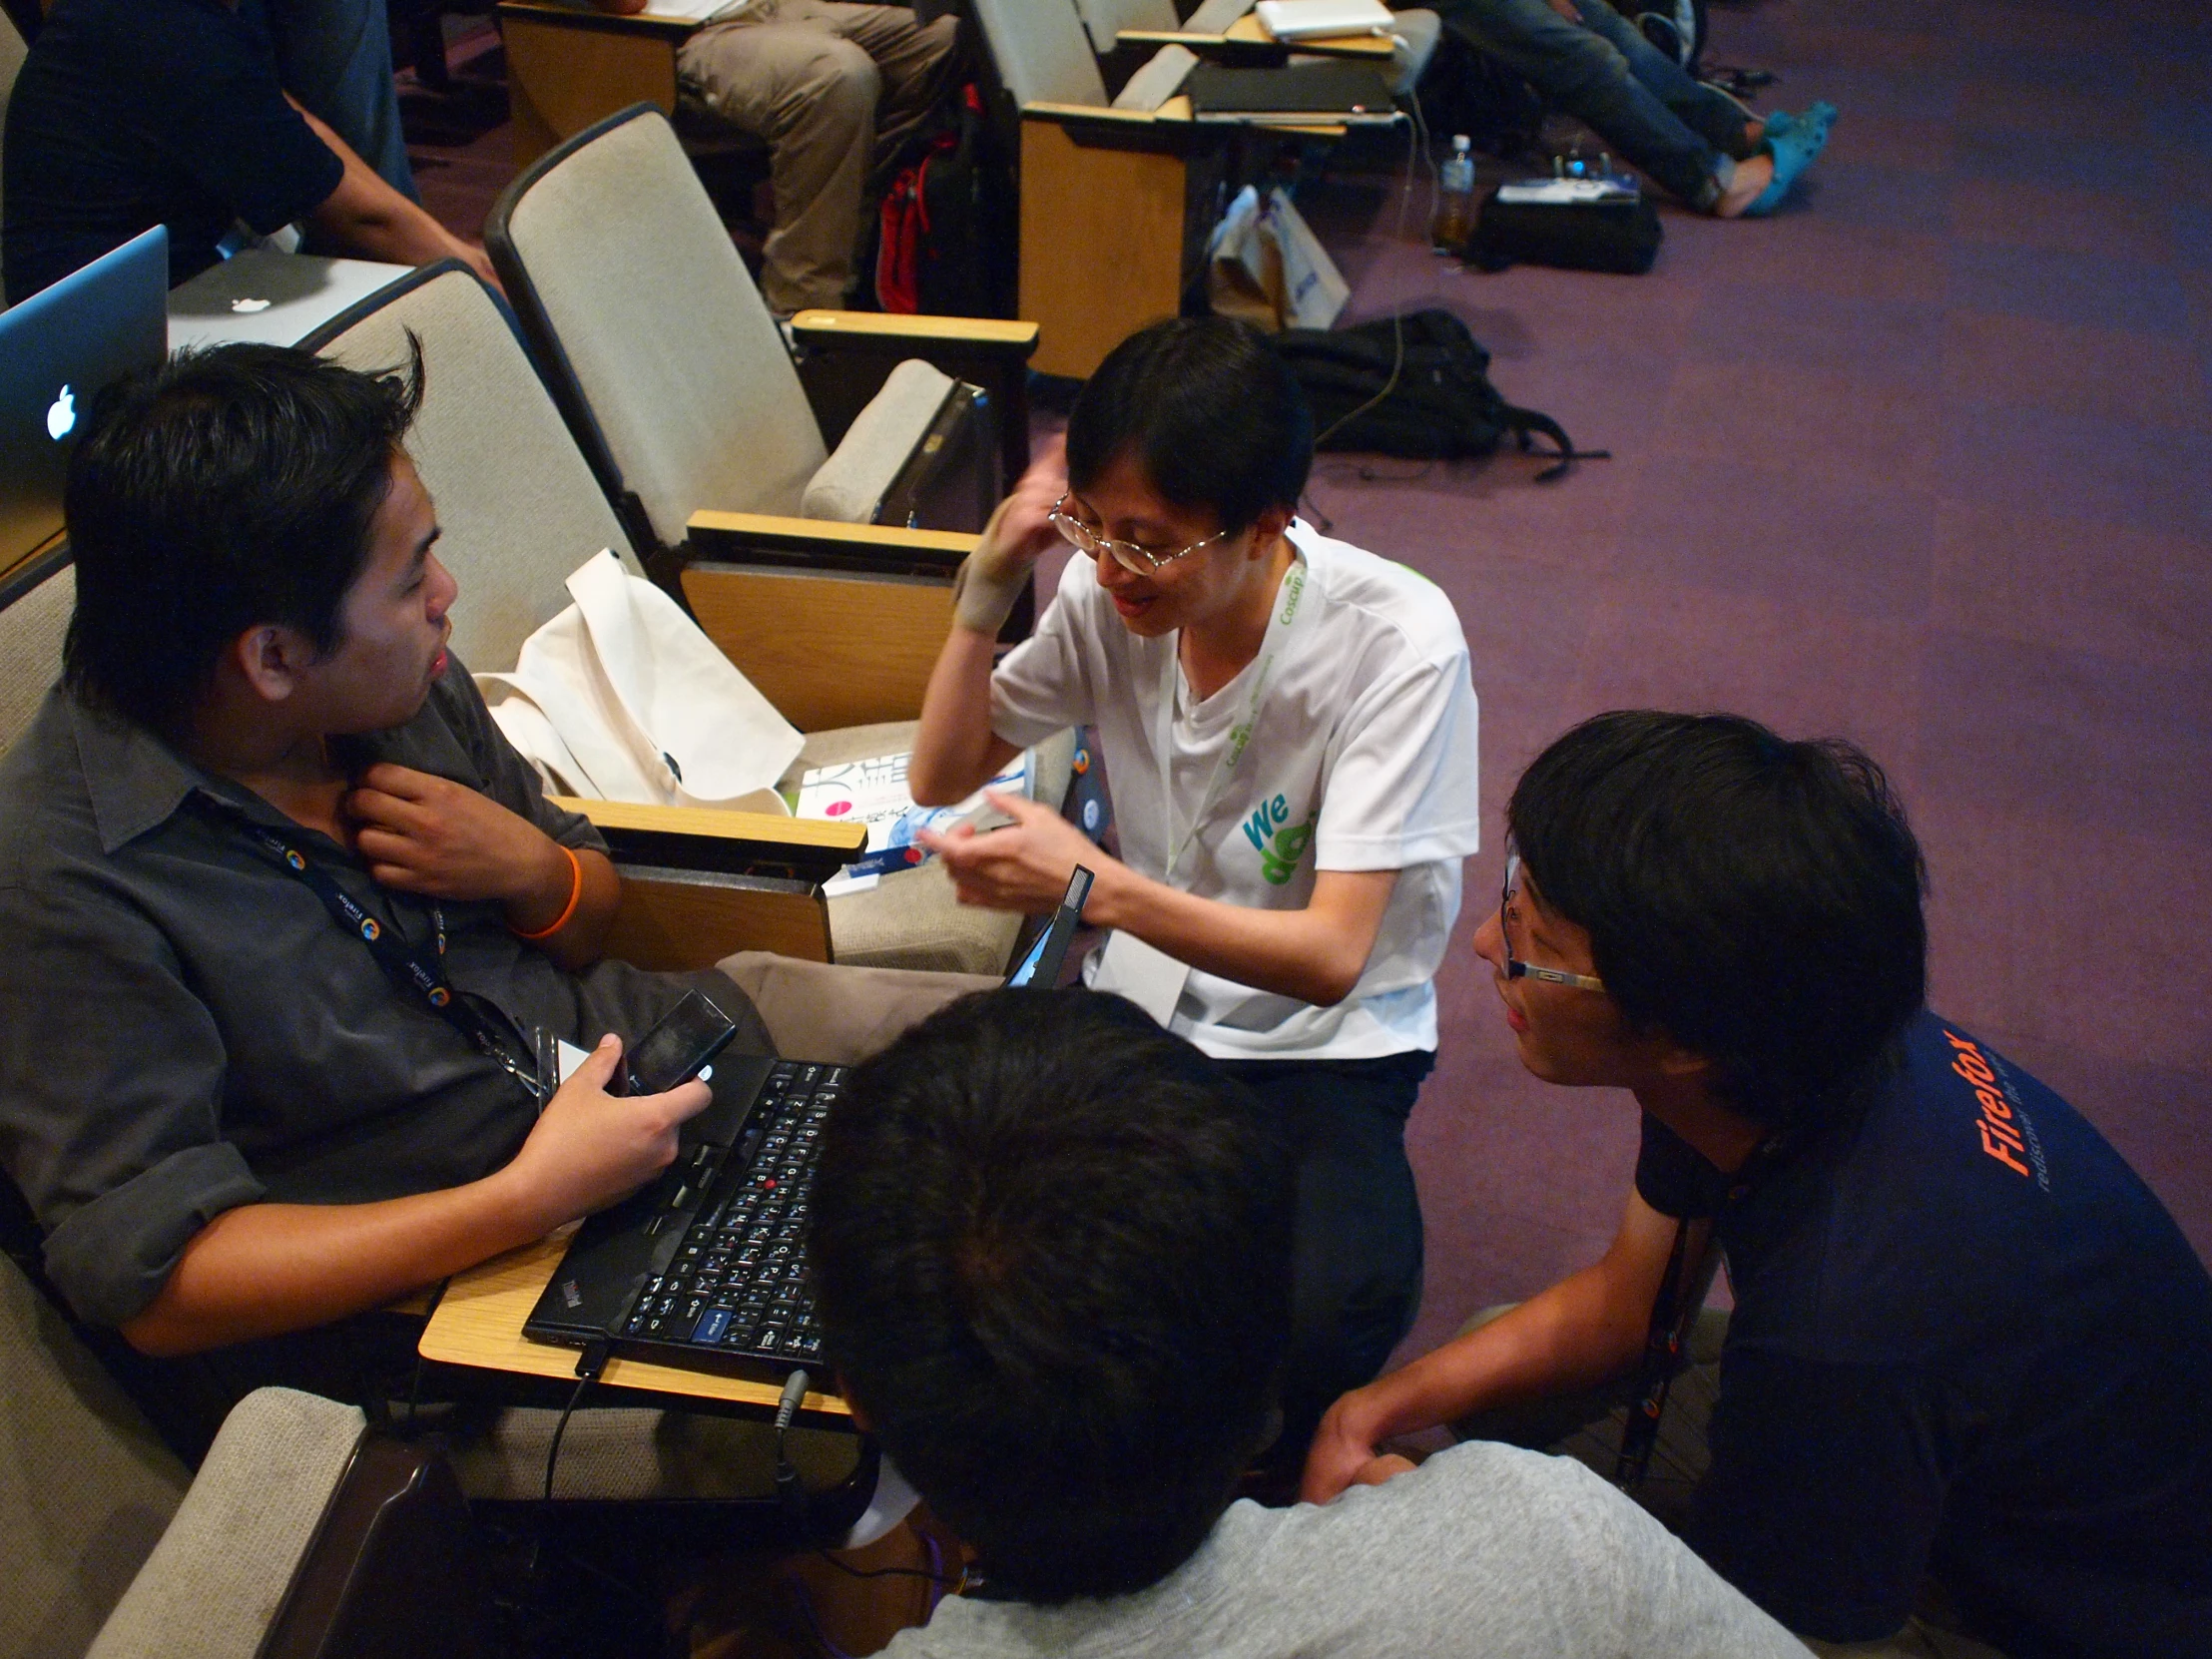 a group of people in auditorium seating looking at computers